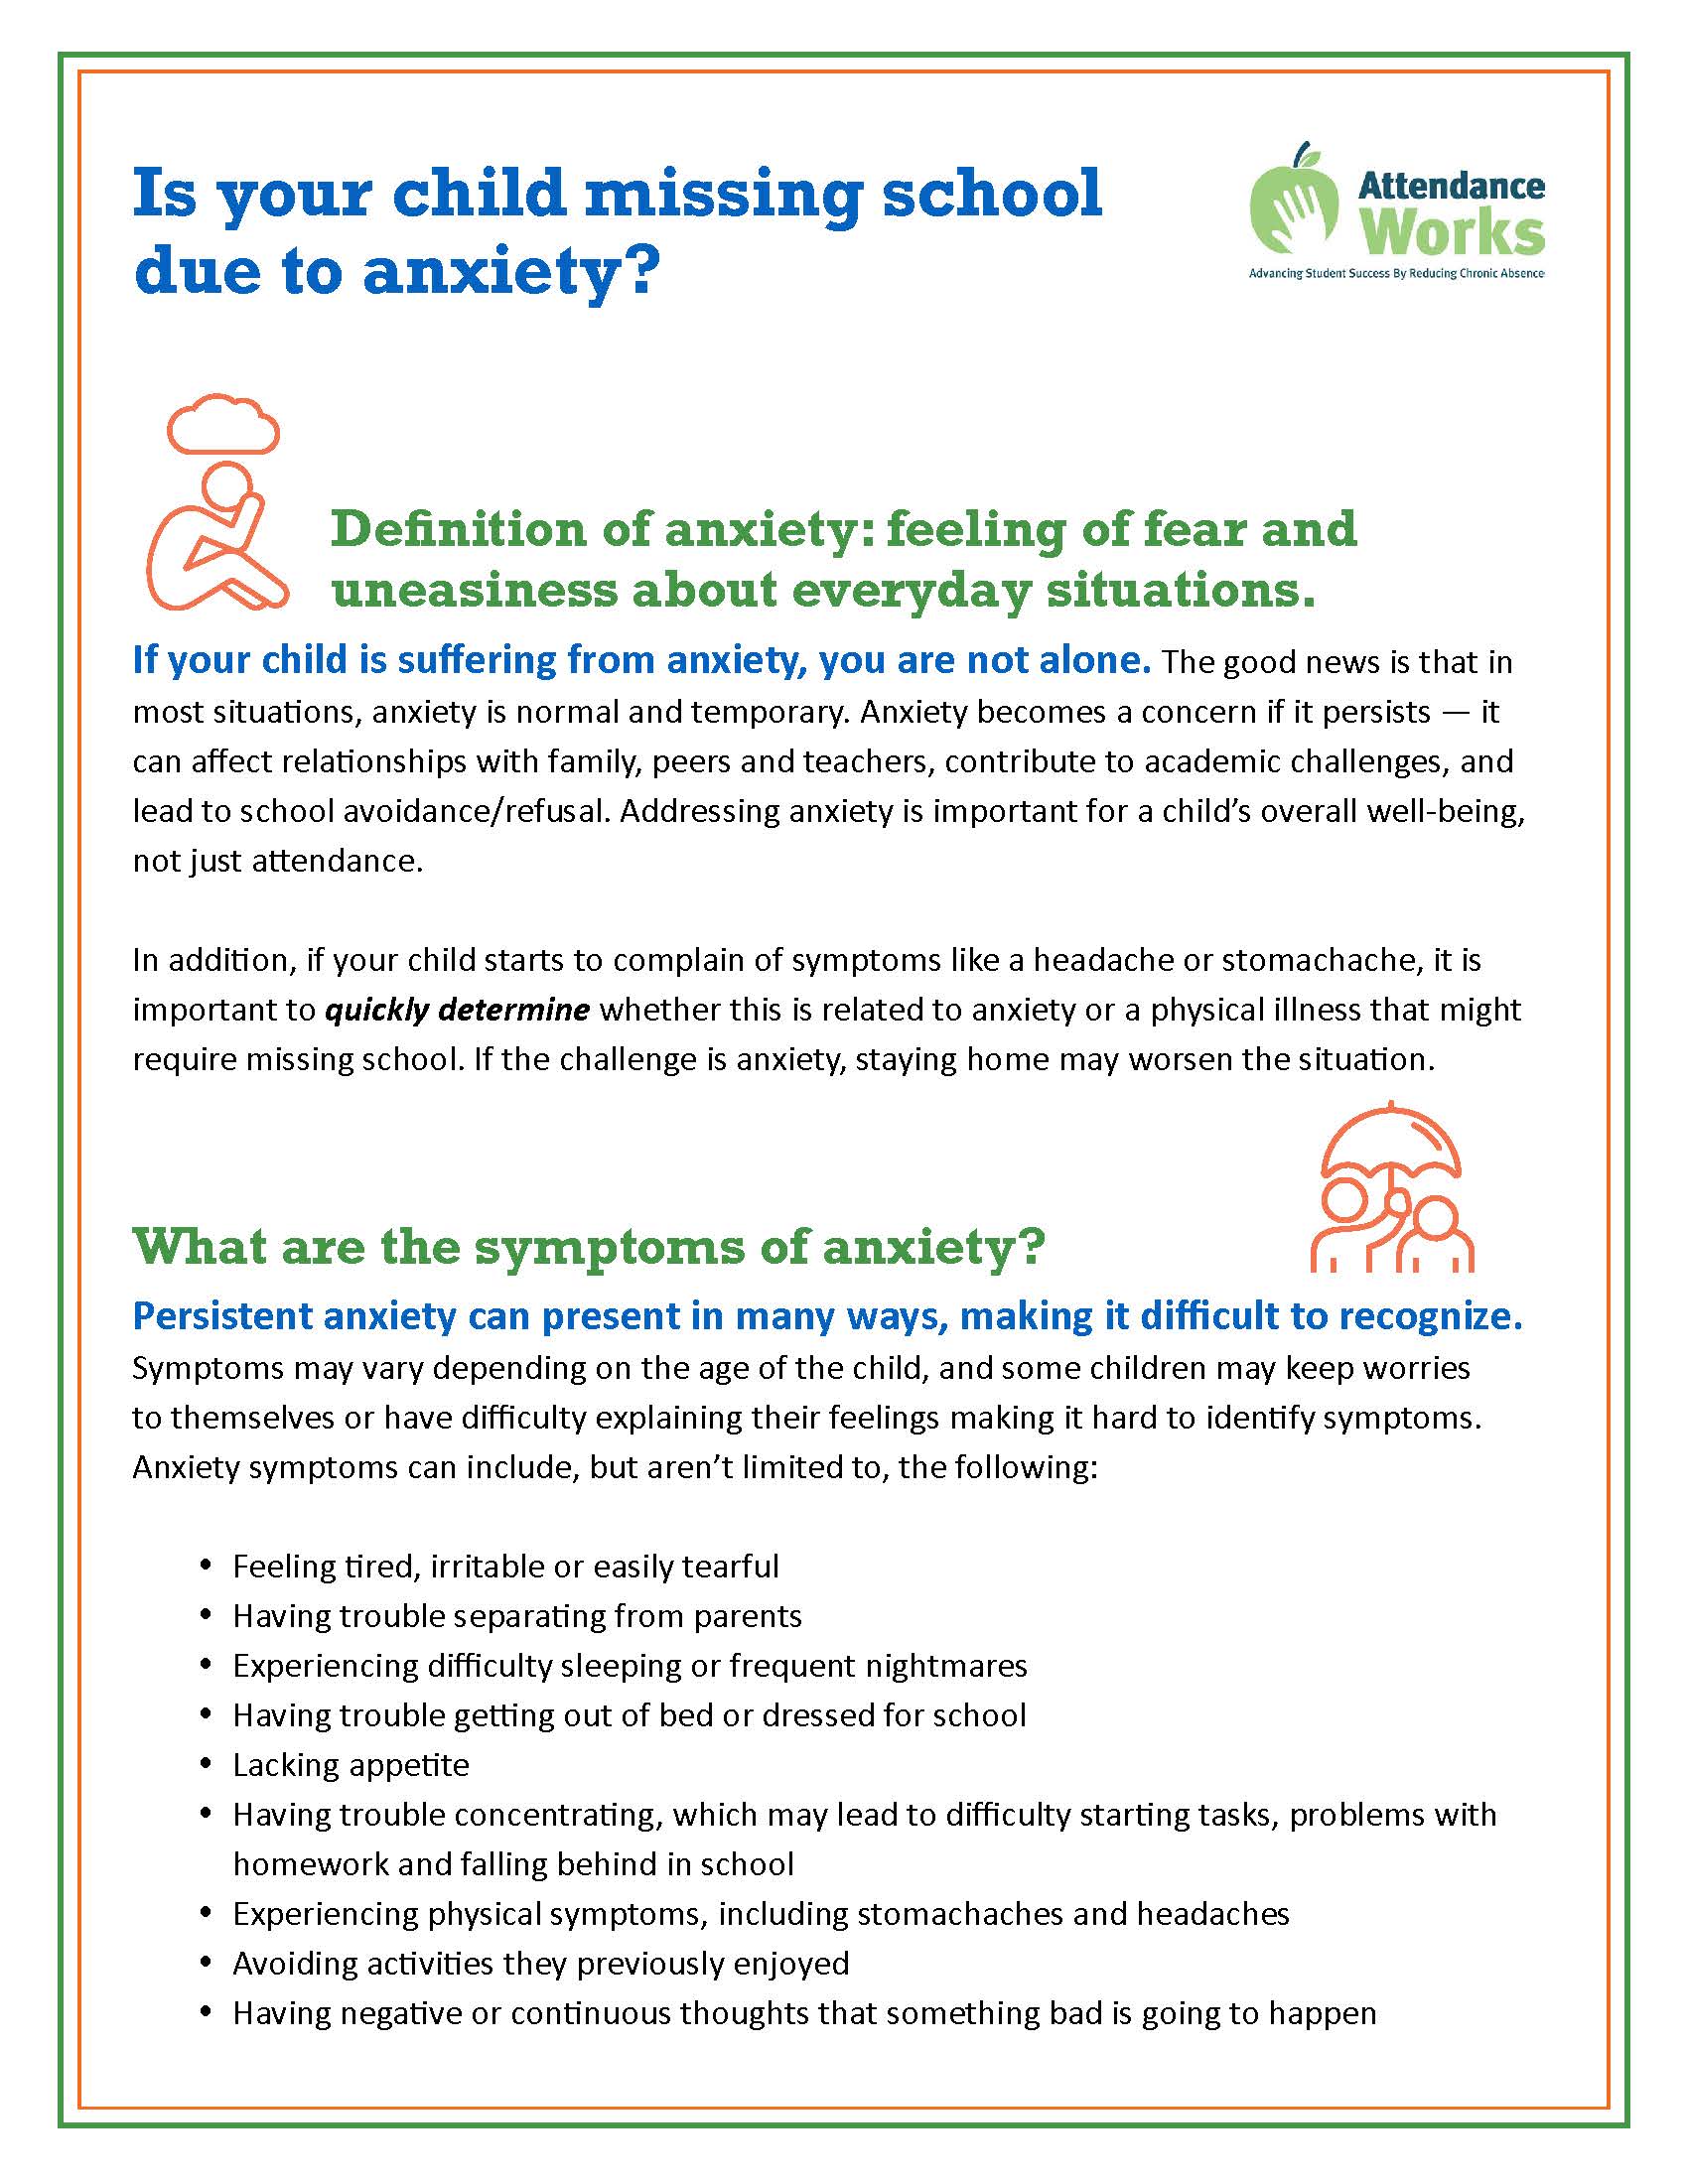  Definition of anxiety: feeling of fear and uneasiness about everyday situations. If your child is suffering from anxiety, you are not alone. The good news is that in most situations, anxiety is normal and temporary. Anxiety becomes a concern if it persists — it can affect relationships with family, peers and teachers, contribute to academic challenges, and lead to school avoidance/refusal. Addressing anxiety is important for a child’s overall well-being, not just attendance. In addition, if your child starts to complain of symptoms like a headache or stomachache, it is important to quickly determine whether this is related to anxiety or a physical illness that might require missing school. If the challenge is anxiety, staying home may worsen the situation. What are the symptoms of anxiety? Persistent anxiety can present in many ways, making it difficult to recognize. Symptoms may vary depending on the age of the child, and some children may keep worries to themselves or have difficulty explaining their feelings making it hard to identify symptoms. Anxiety symptoms can include, but aren’t limited to, the following:  Feeling tired, irritable or easily tearful  Having trouble separating from parents  Experiencing difficulty sleeping or frequent nightmares  Having trouble getting out of bed or dressed for school  Lacking appetite  Having trouble concentrating, which may lead to difficulty starting tasks, problems with homework and falling behind in school  Experiencing physical symptoms, including stomachaches and headaches  Avoiding activities they previously enjoyed  Having negative or continuous thoughts that something bad is going to happen Is your child missing school due to anxiety? What can families do? Here are some tips that you can use to help your child get through these challenges, by intervening as quickly as possible, and return to school:  Do not punish your child for refusing to go to school, as this can worsen things.  If possible, avoid letting your child stay home. Though staying home from school may provide short-term relief for your child, continued absence from school will lead to the feeling of being disconnected from classmates and teachers, cause your child to fall behind academically and only make it harder to return.  Speak with your child. Try to understand what’s bothering them and why they are avoiding school. If you are feeling a similar anxiety, it may help to share this with your child and to explain what you are doing to get through it.  Make it clear that you are there to help your child and that you believe they can face their fears and get through this problem. Take advantage of school resources. Working through your child’s anxiety issues can be difficult and scary, and you shouldn’t have to do it alone. Take advantage of the resources at your child’s school:  Talk with the school nurse, counselor, social worker and/or psychologist to discuss the student’s challenges, identify what can help your child and develop a return-to-school plan.  For some students, this may need to happen gradually (one or two classes initially and eventually a full day).  In certain situations, a 504 plan or Individualized Education Program may be needed to ensure your child receives appropriate support and resources. If symptoms persist or are very severe, your child’s anxiety may be due to an underlying behavioral health disorder (i.e., anxiety disorder, panic disorder), an undiagnosed learning disability or the result of a physical or chronic health condition and should be evaluated by your child’s medical provider. Finally, remember to take care of your own physical and emotional well-being! Resources where you can find more information on anxiety and school avoidance Separation Anxiety in Babies, Toddlers and School-Aged Children: Causes, Signs and What to Do Anxiety and Depression CDC Understanding Anxiety in Children School Avoidance Alliance: School Avoidance 101 School Refusal: When a Child Won’t Go to School Parent Anxiety Handout – EPIC The Ultimate Guide to Working With Your School www.attendanceworks.org